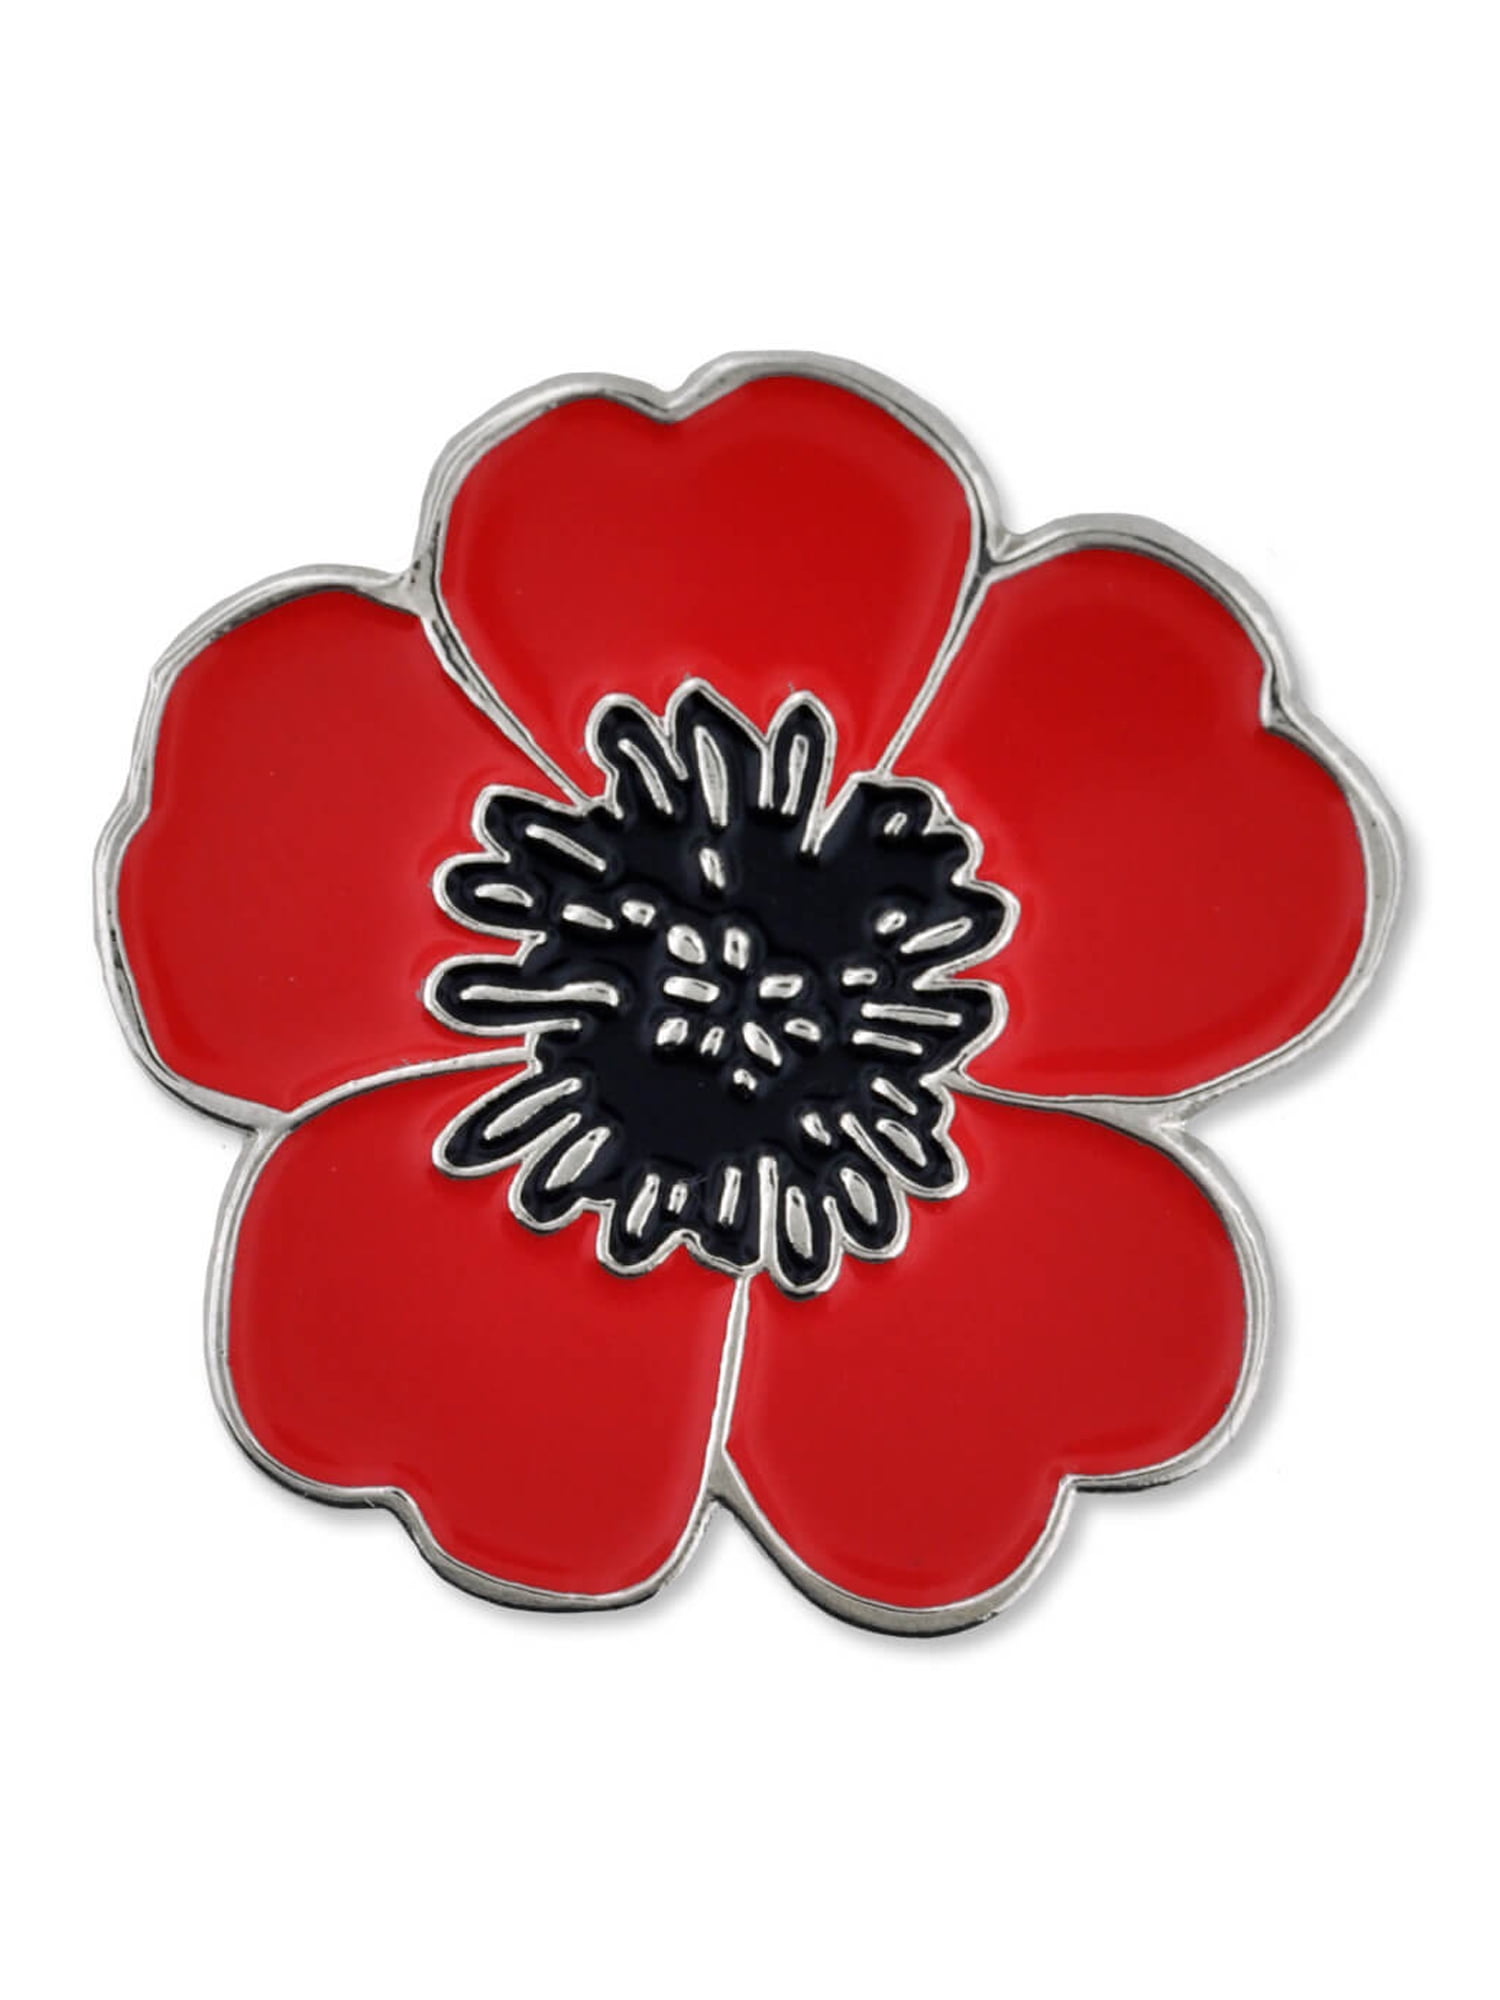 Vehicle Car Magnet diameter 4 inches Lest we Forget Poppy Flower 